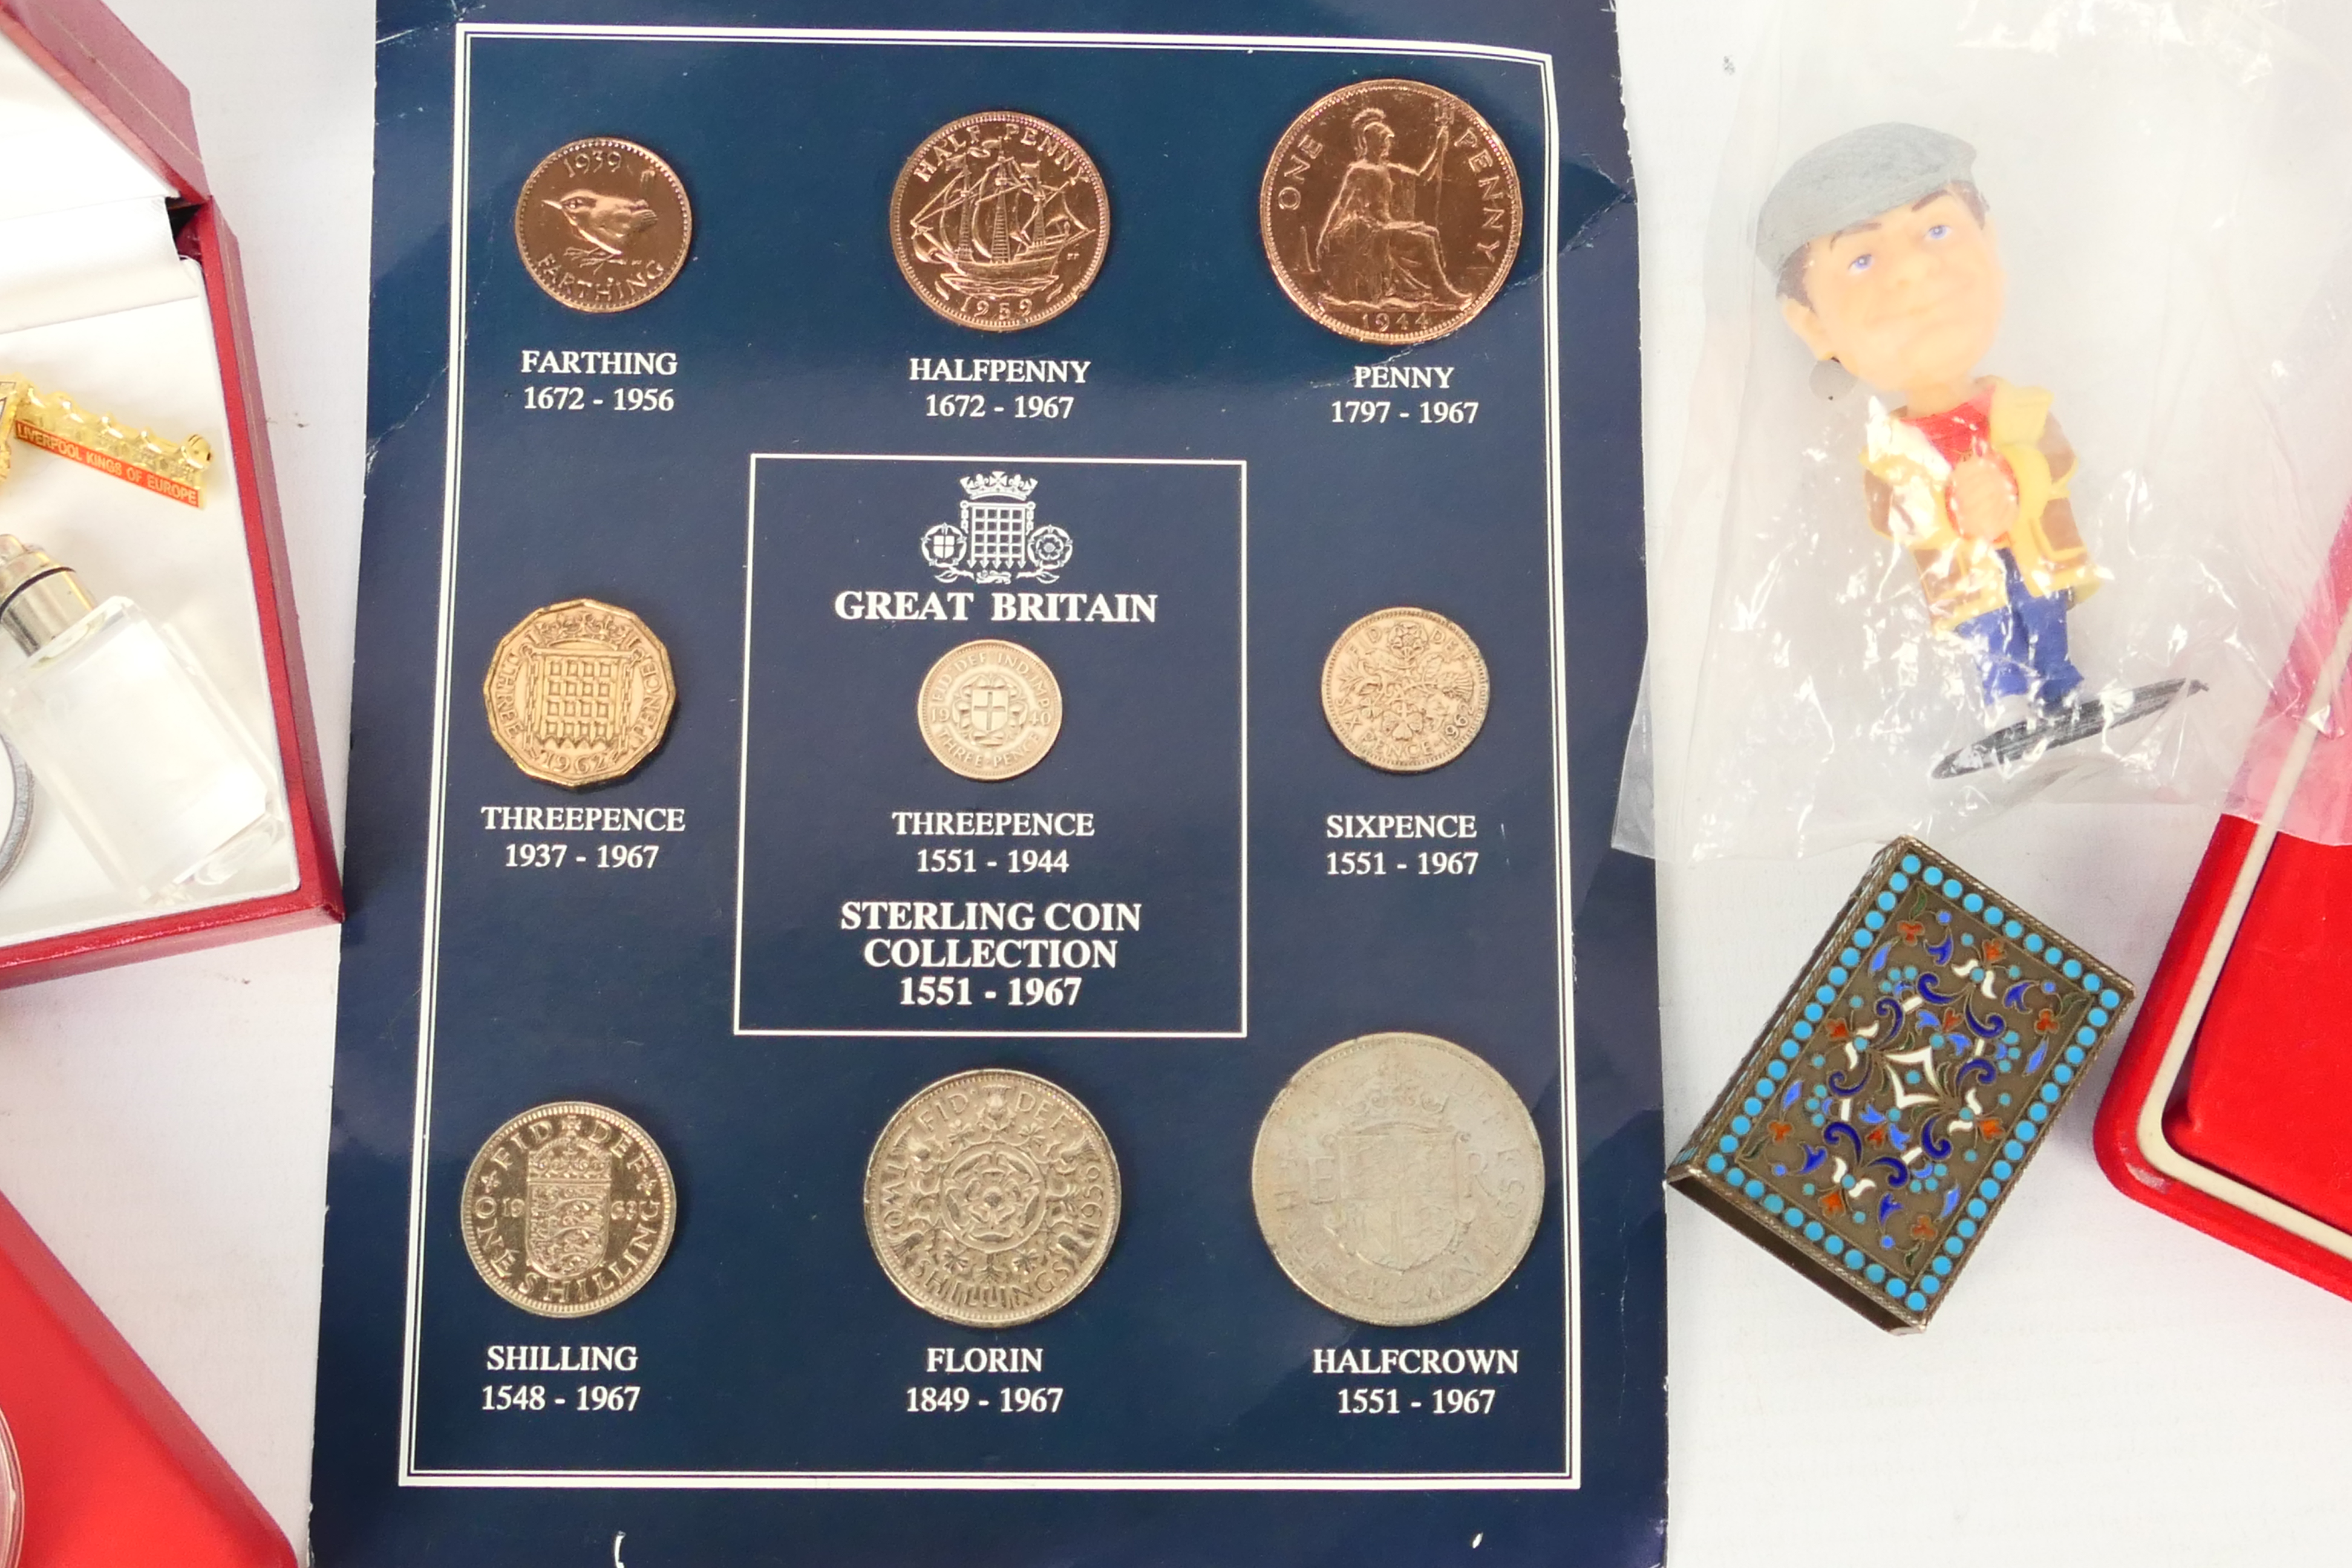 Mixed collectables to include Liverpool Football Club commemorative medals / medallions, - Image 2 of 8